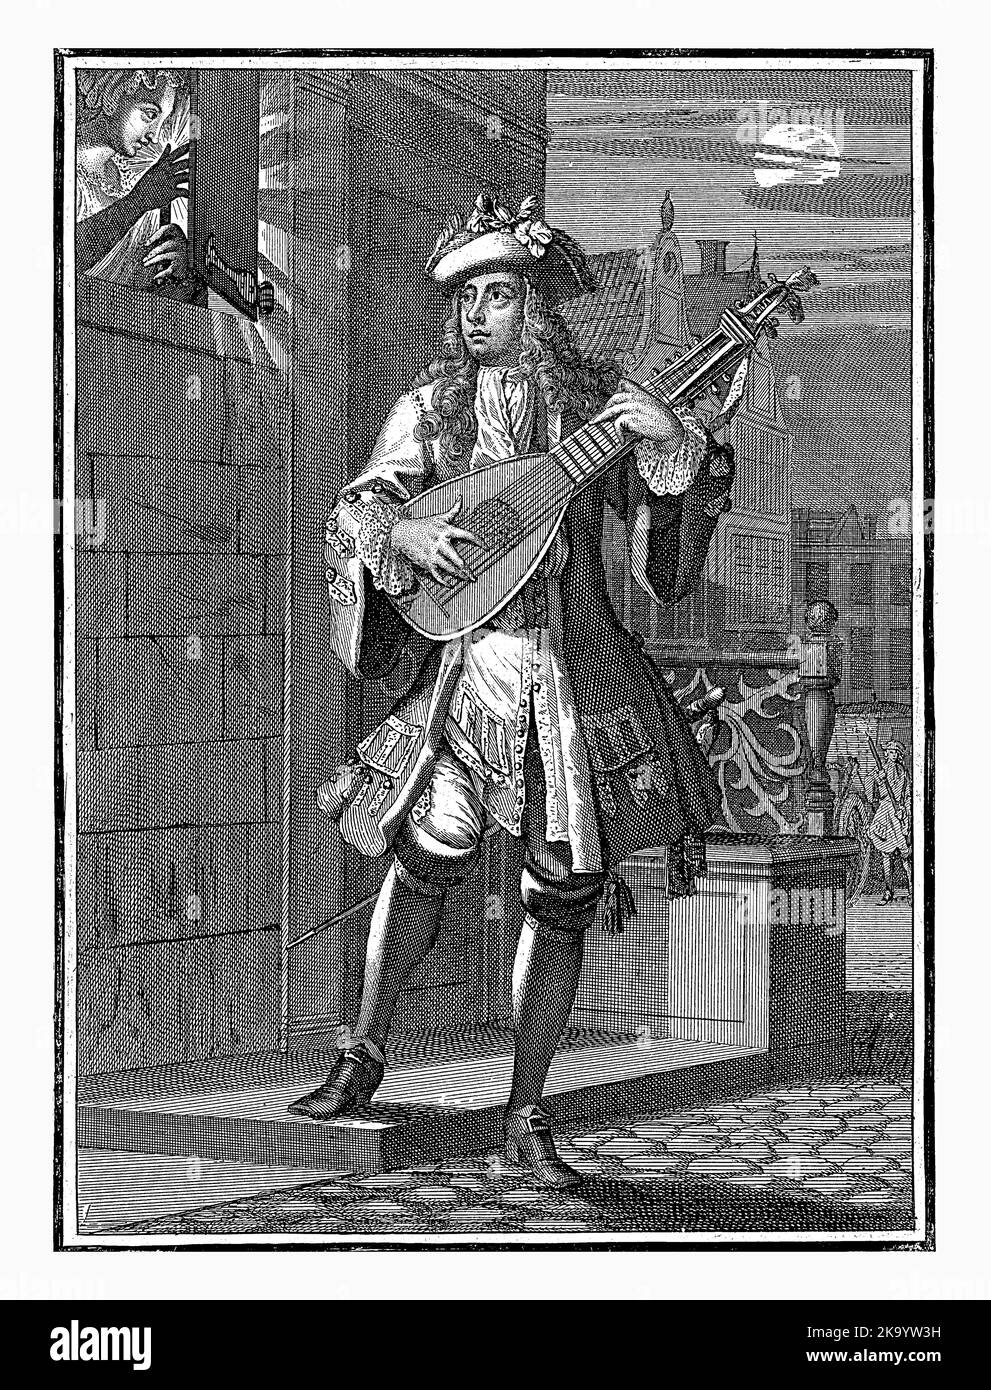 April, Caspar Luyken, 1698 - 1702 The month of April. A nighttime street scene. A young man plays music on a lute in front of a house. His lover looks Stock Photo